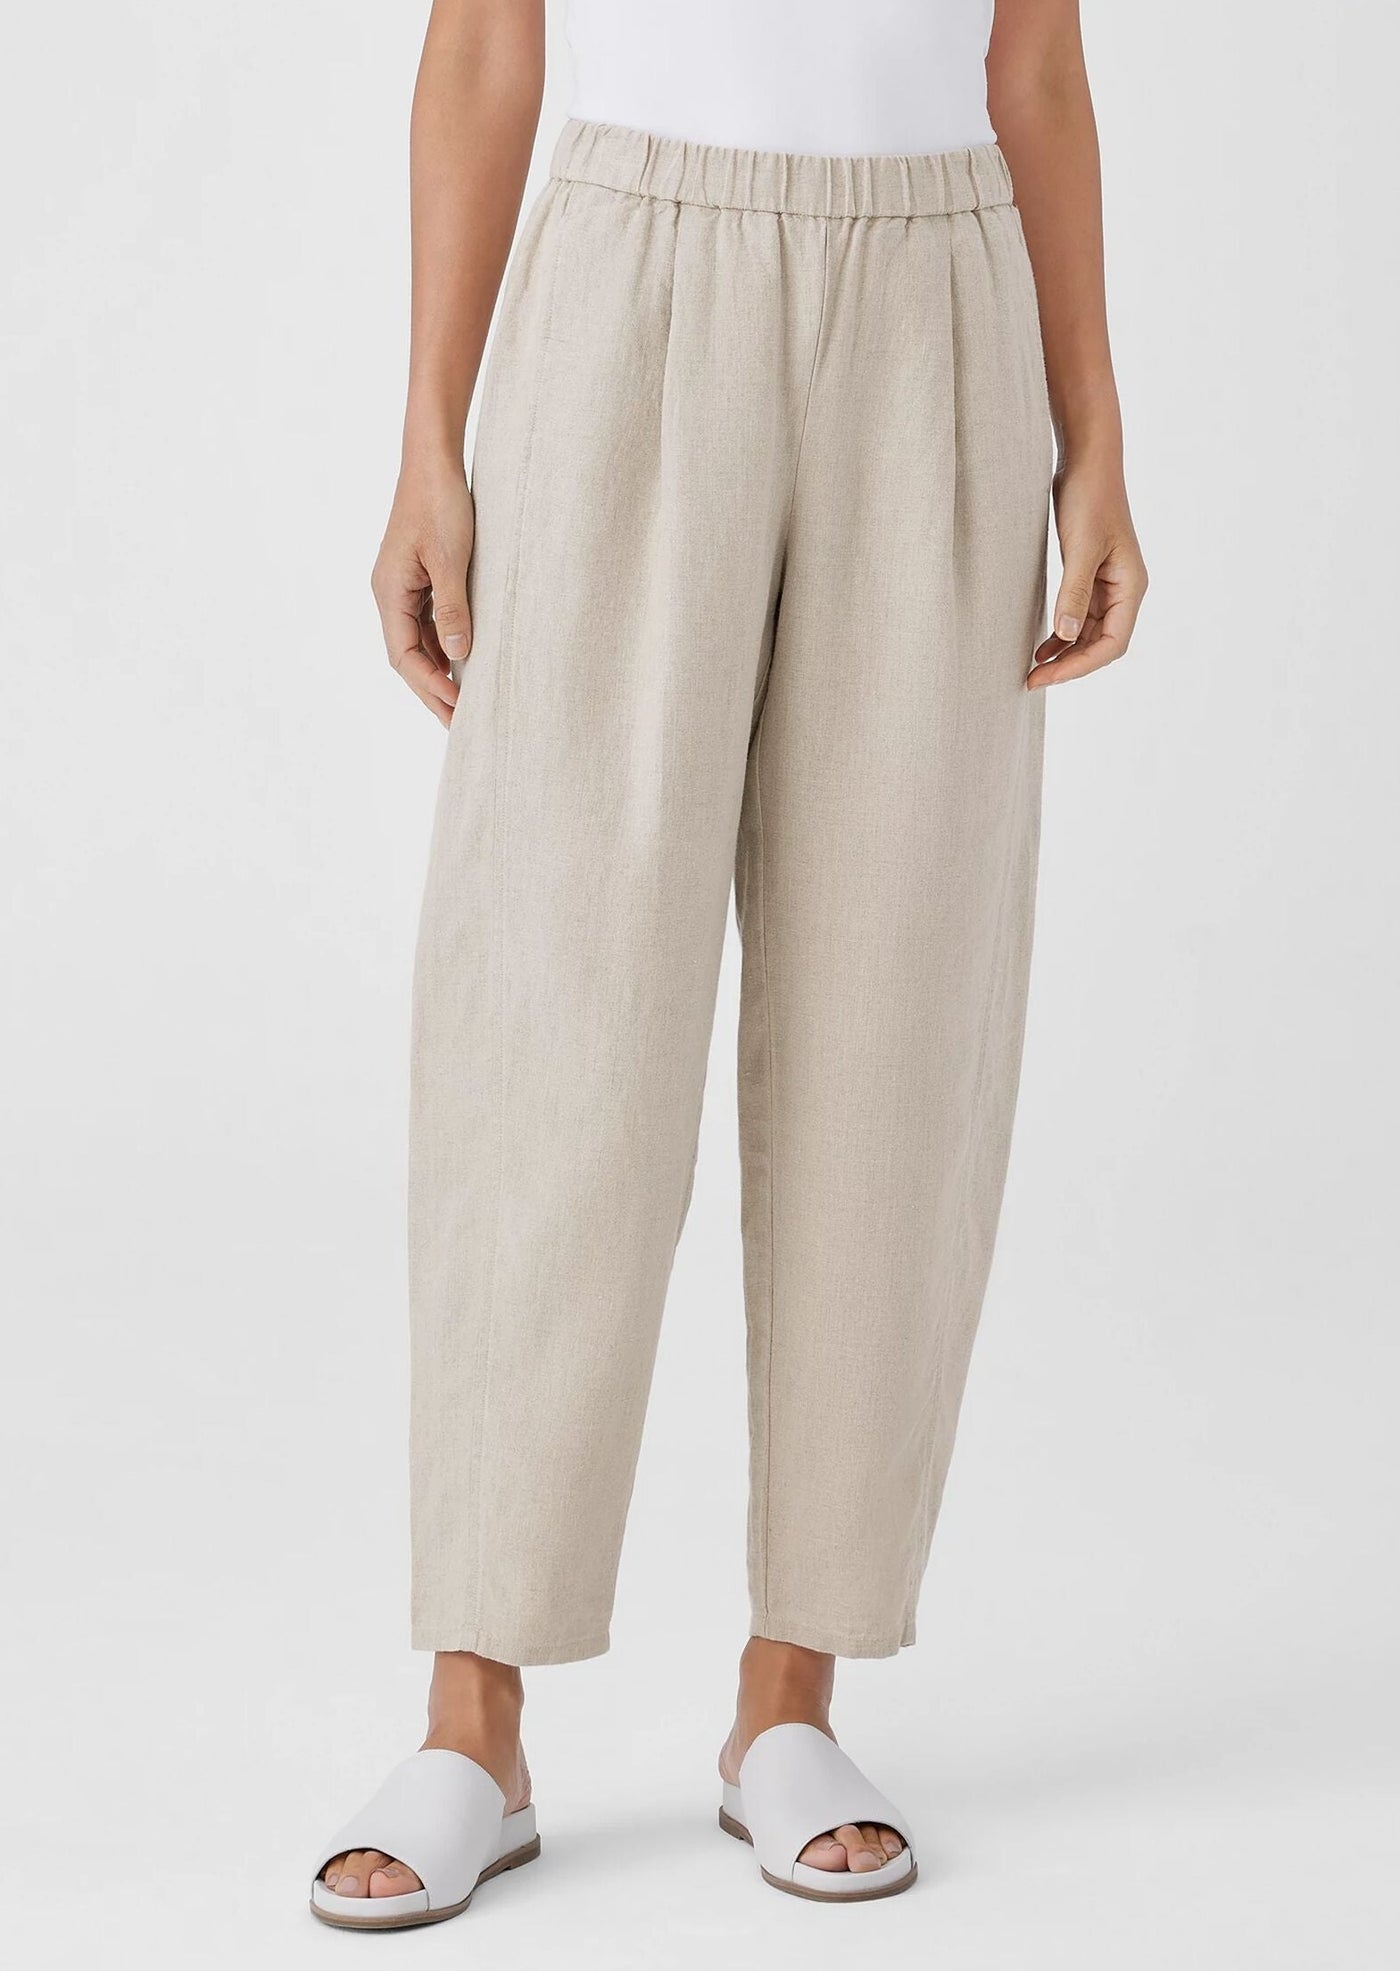 Eileen Fisher Women's Tapered Ankle Pants, Black at  Women's Clothing  store